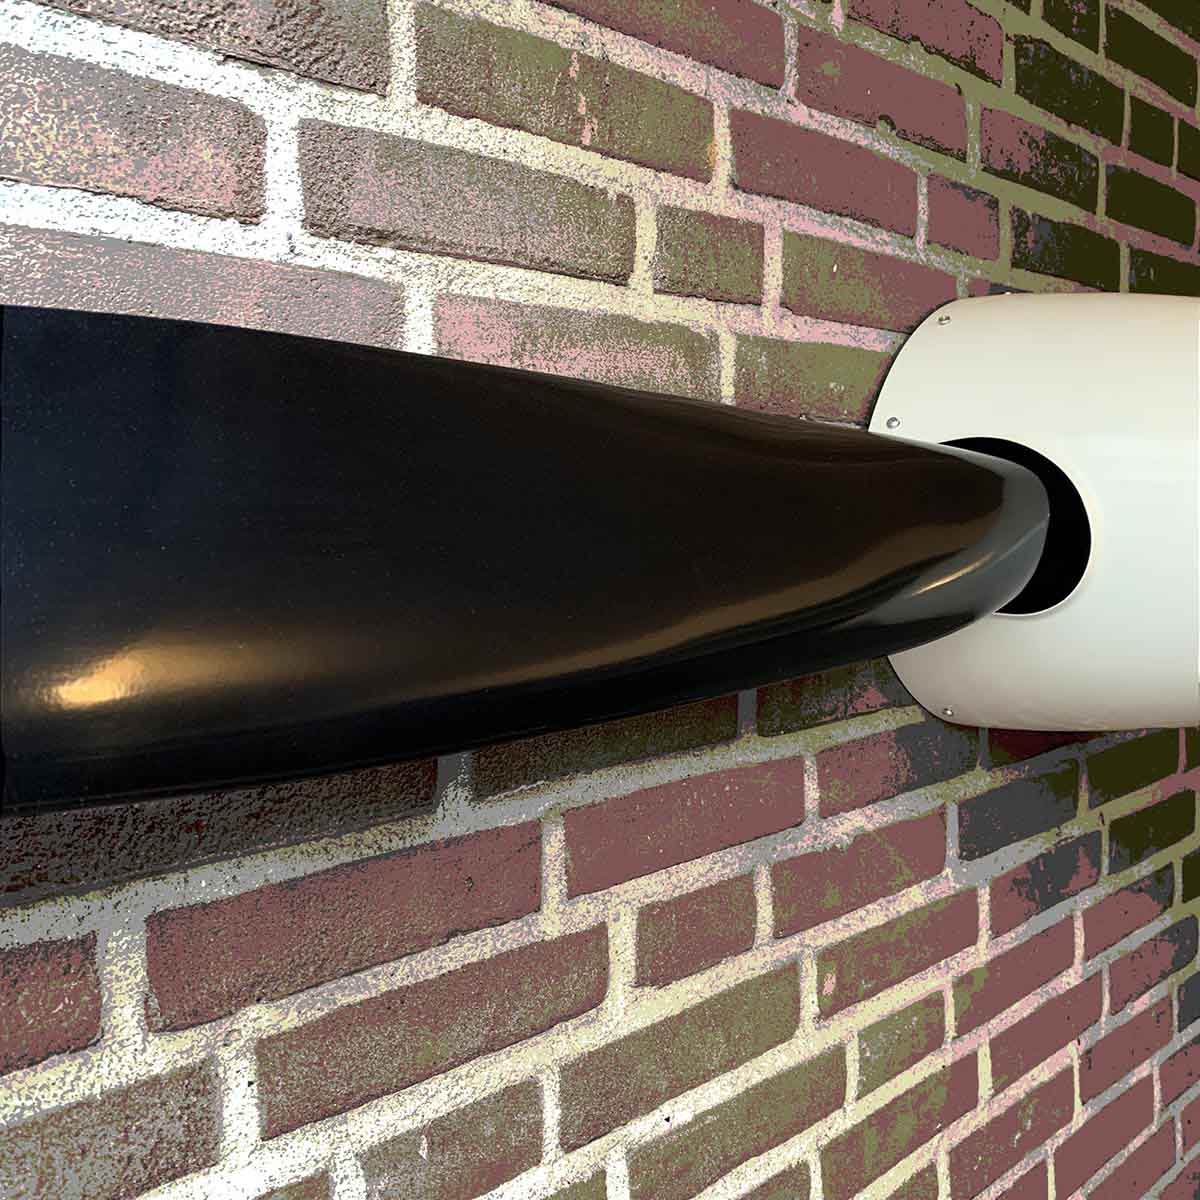 Photo showing the newly coated McCauley propeller blade that has been made available as a decorative wall hanger.